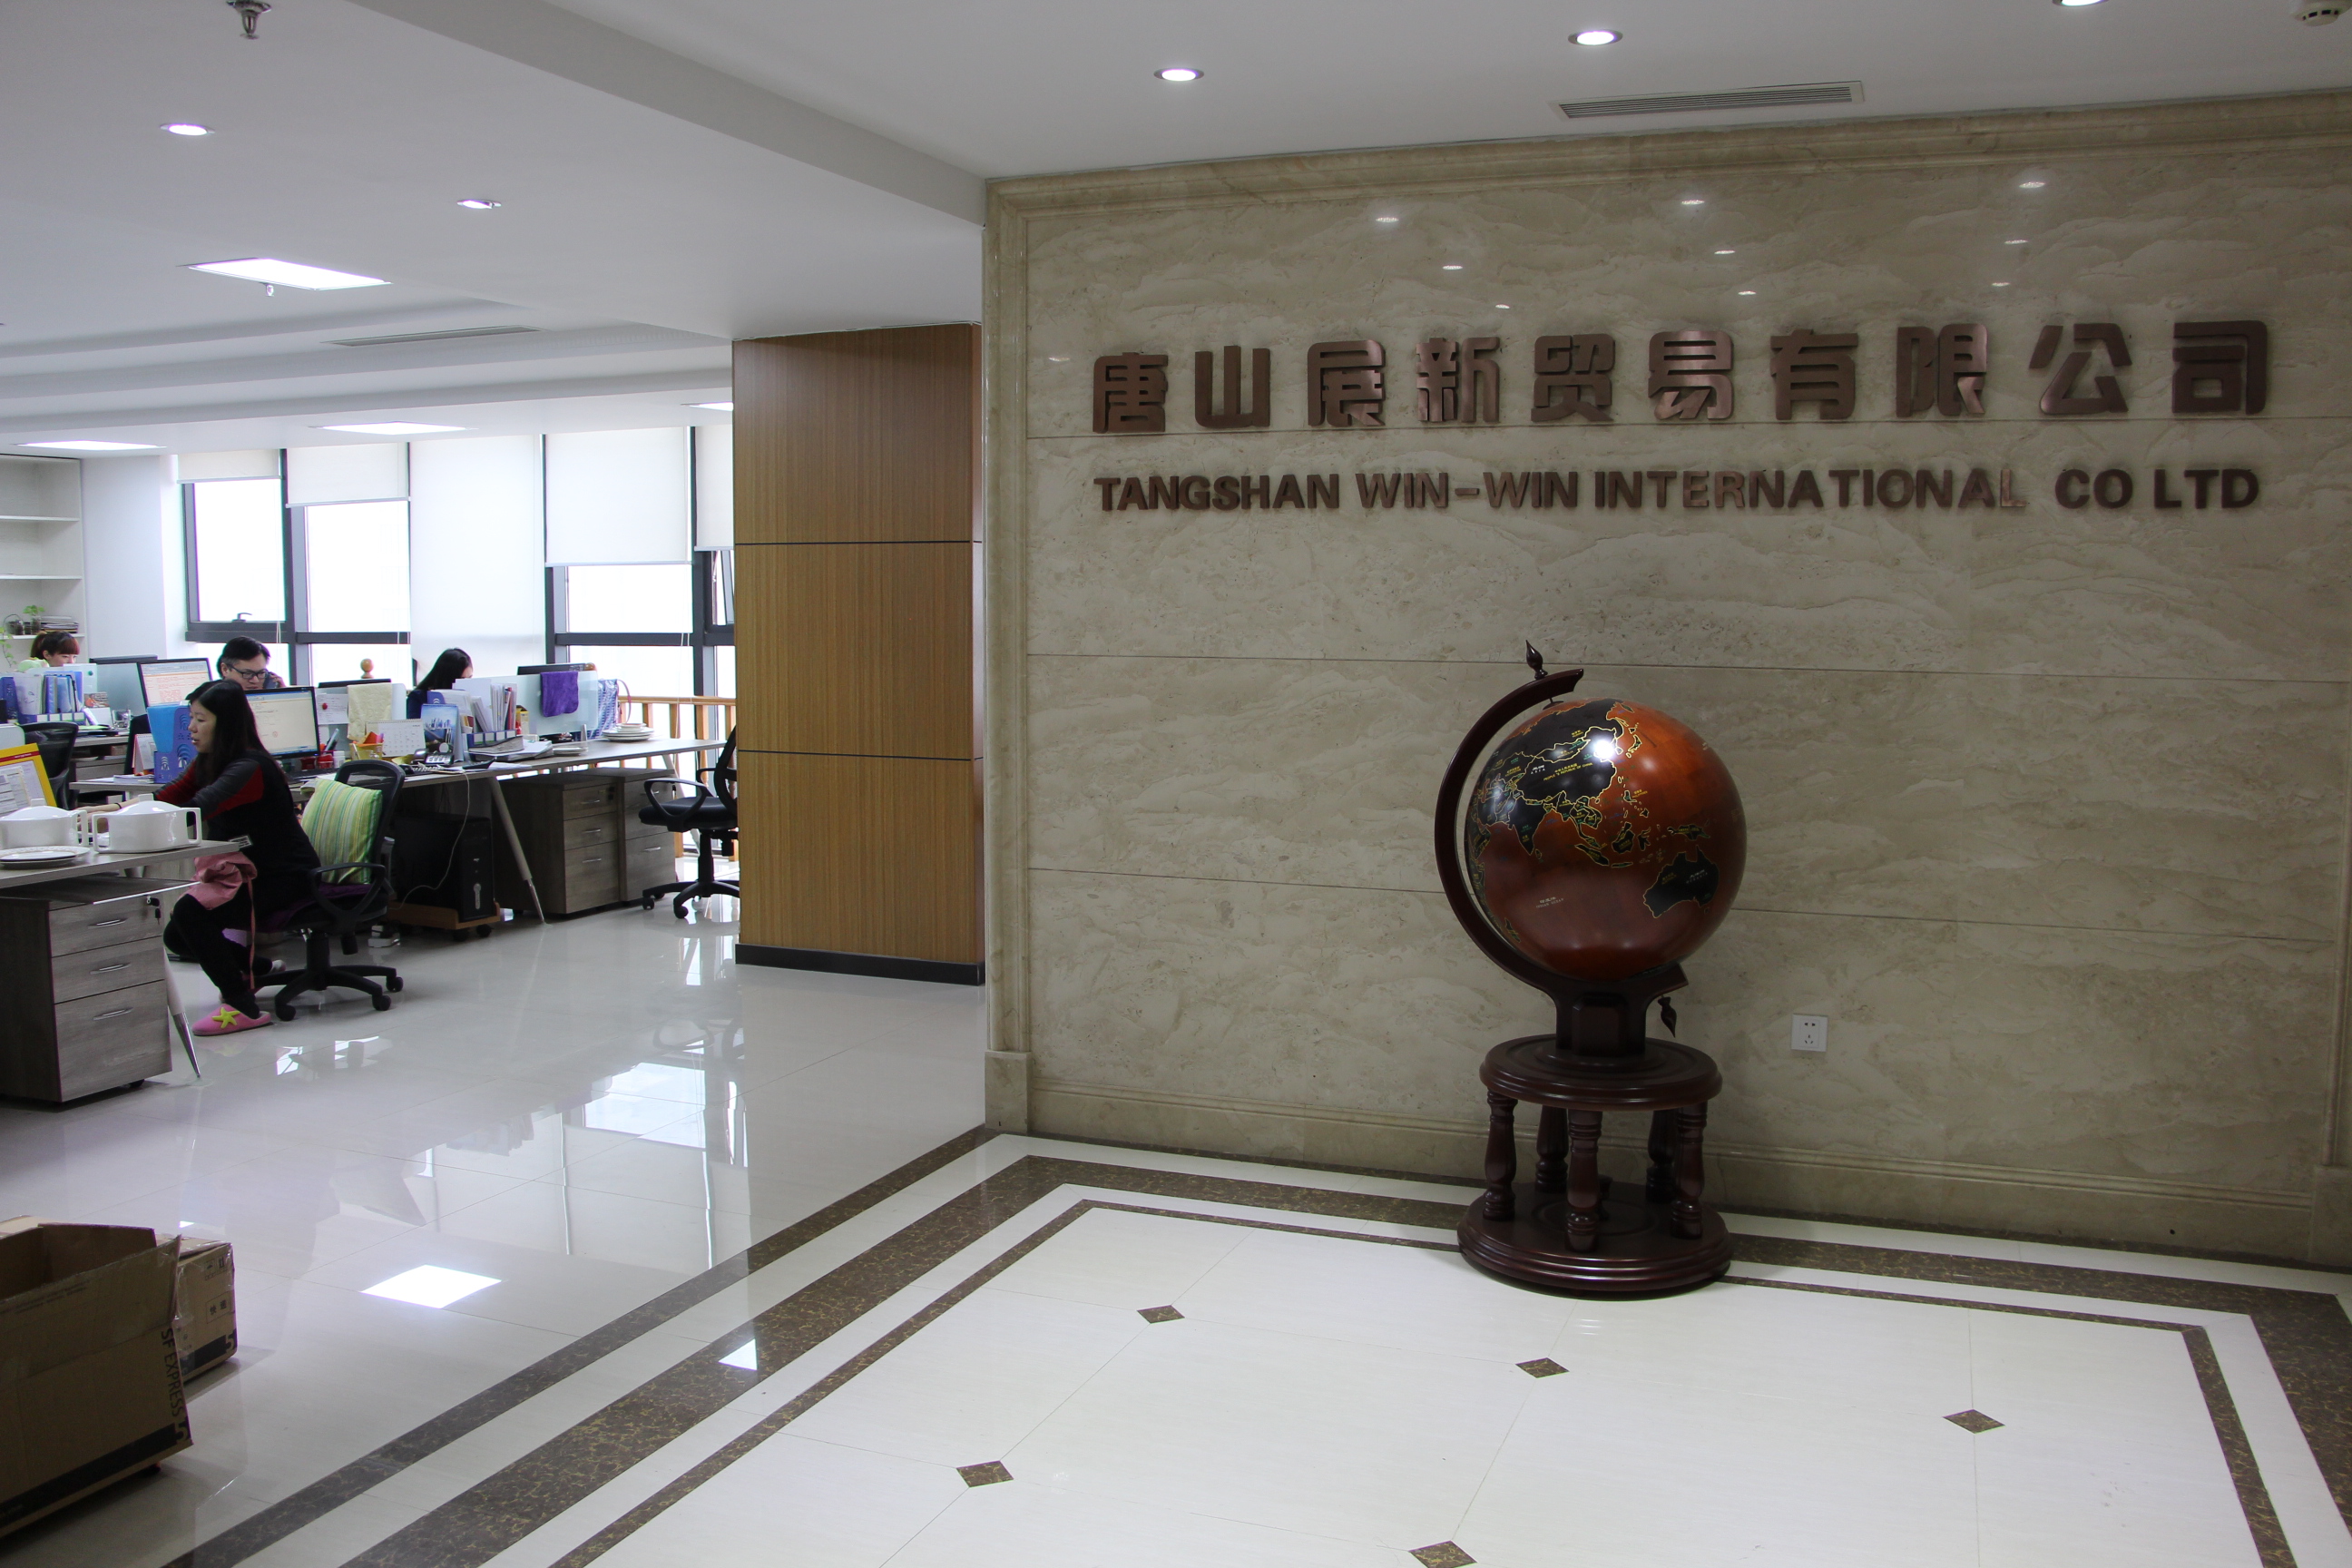 Come and learn about Tangshan Win-Win International Co., Ltd. with me